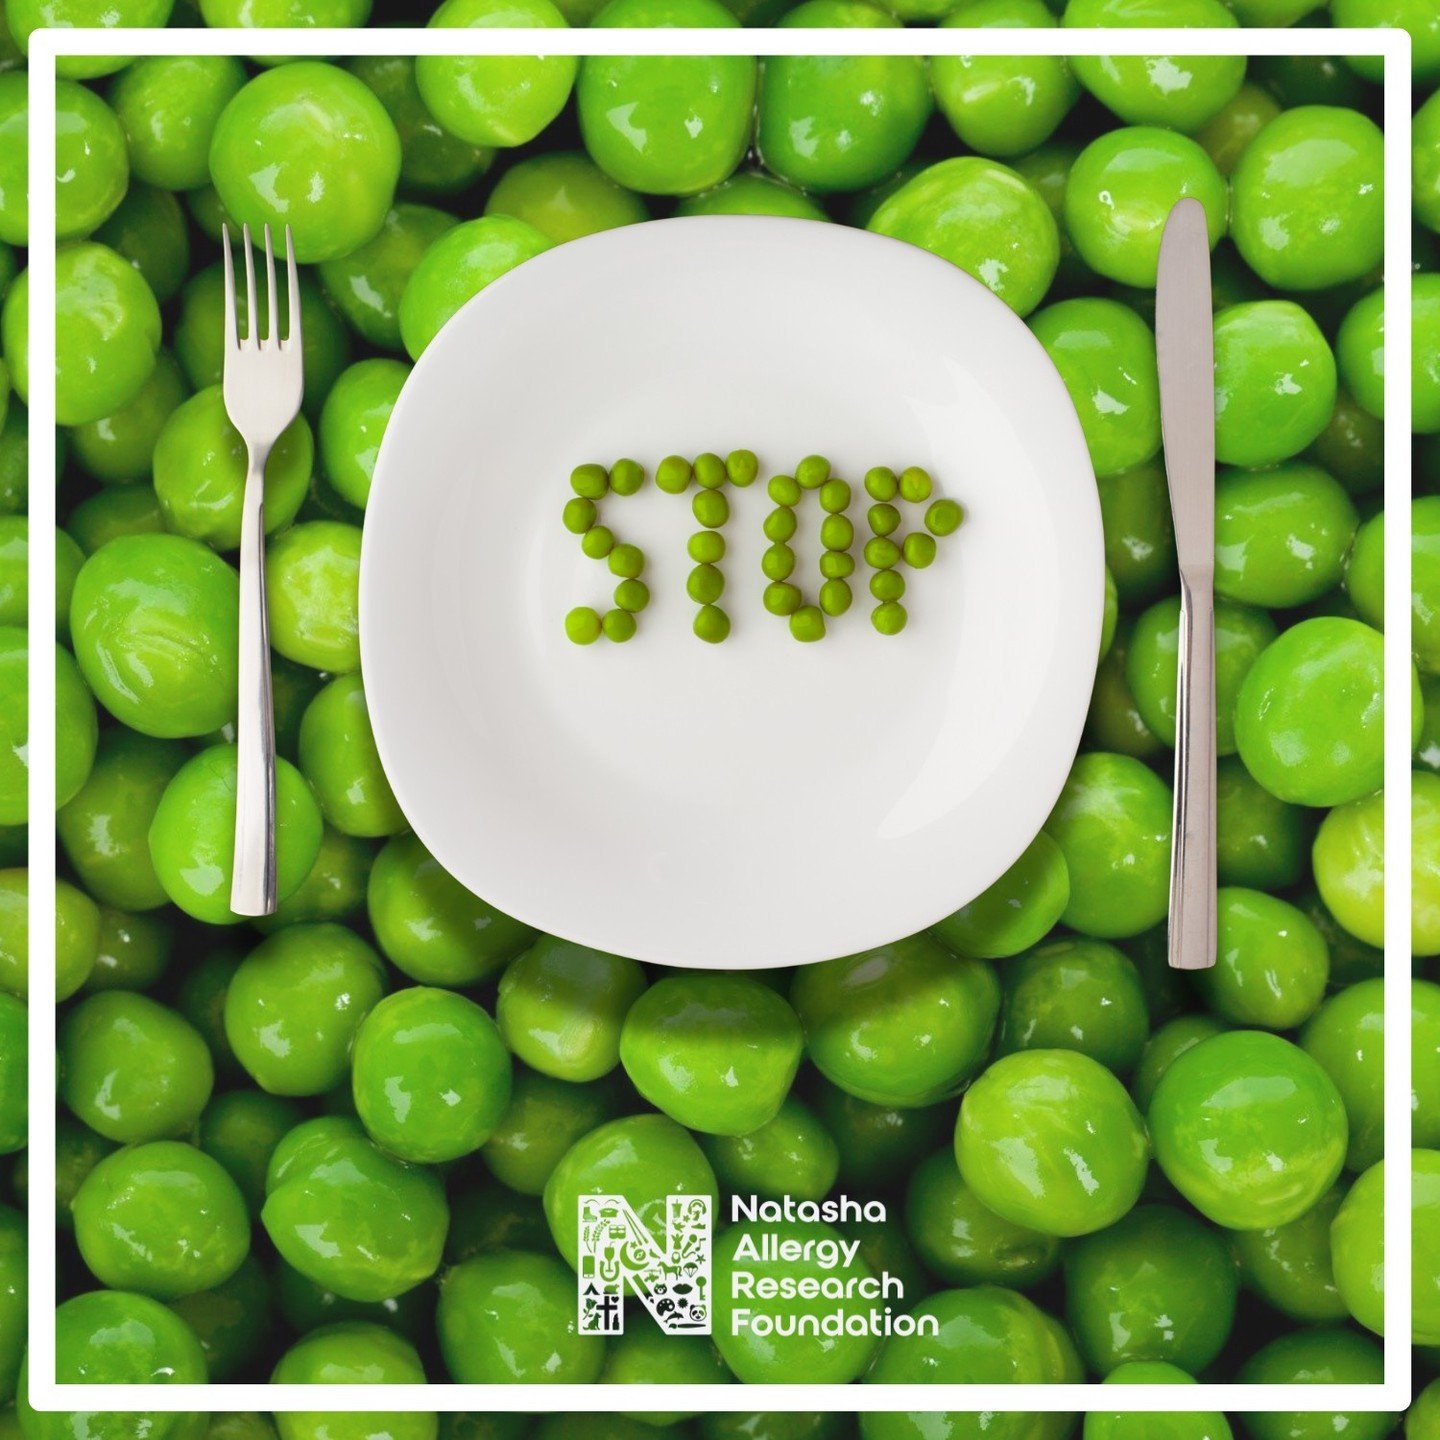 The #Guardian newspaper recently published an article about the increased prevalence of pea protein allergies which is something we have been hearing for some time now. Journalist Hannah Fearn said, 

&lsquo;I took the chance to pop in for my usual, 